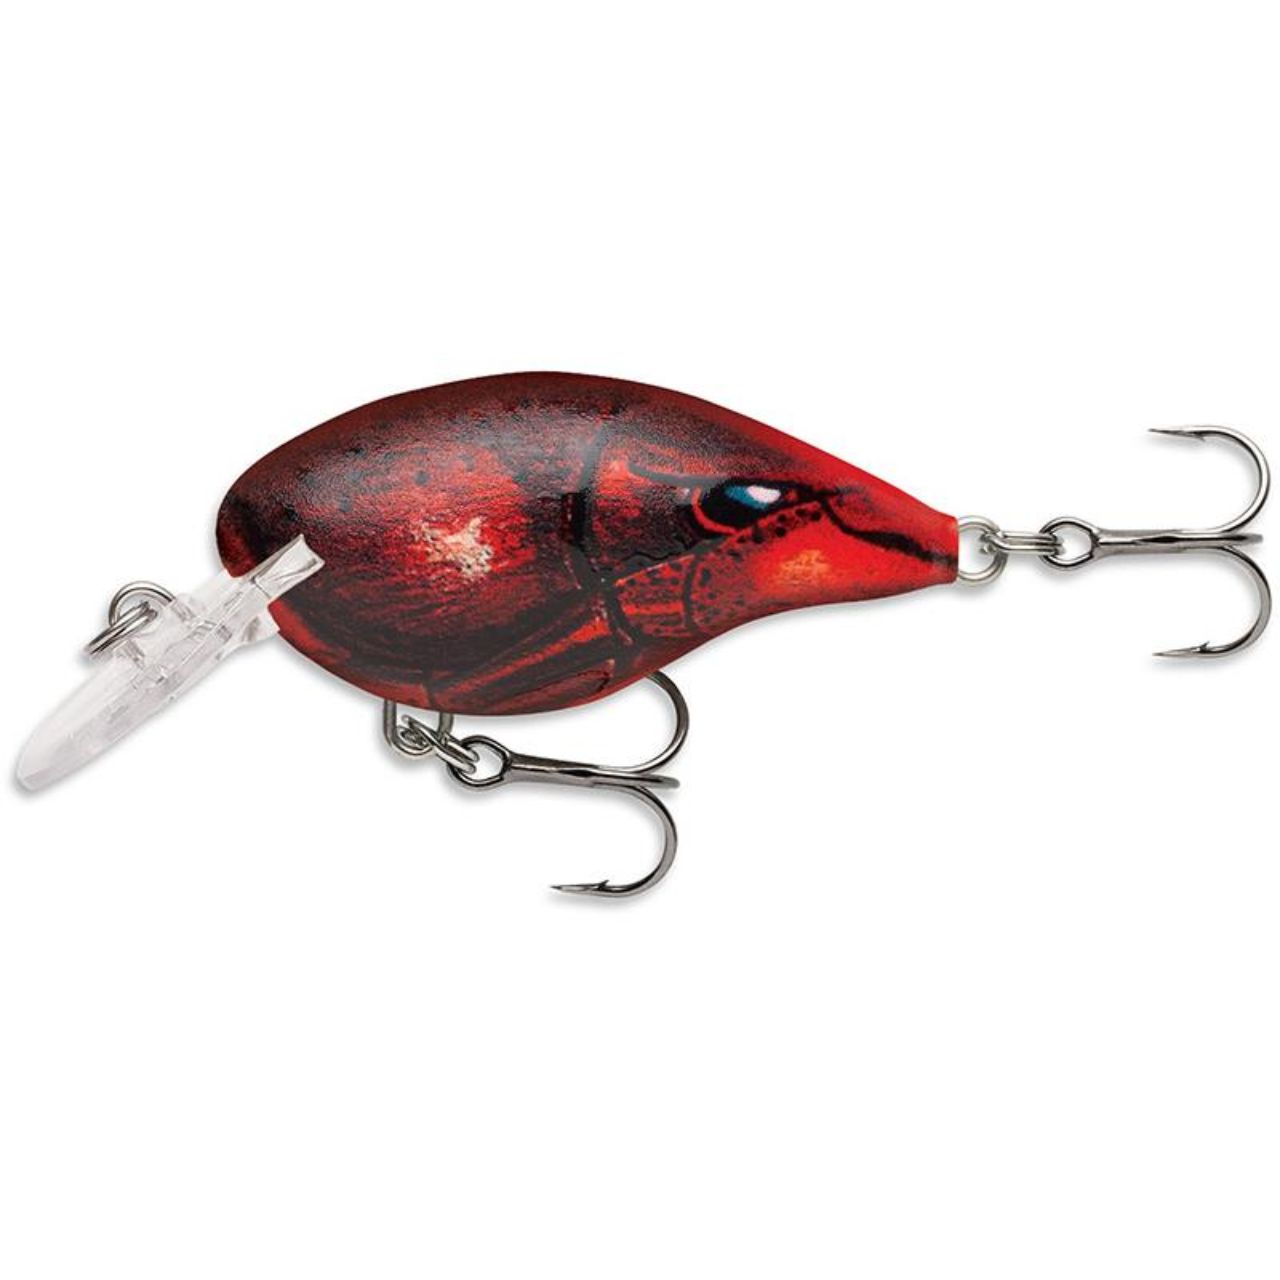 RAPALA DIVES-TO DT 10 RA5820228.jpg